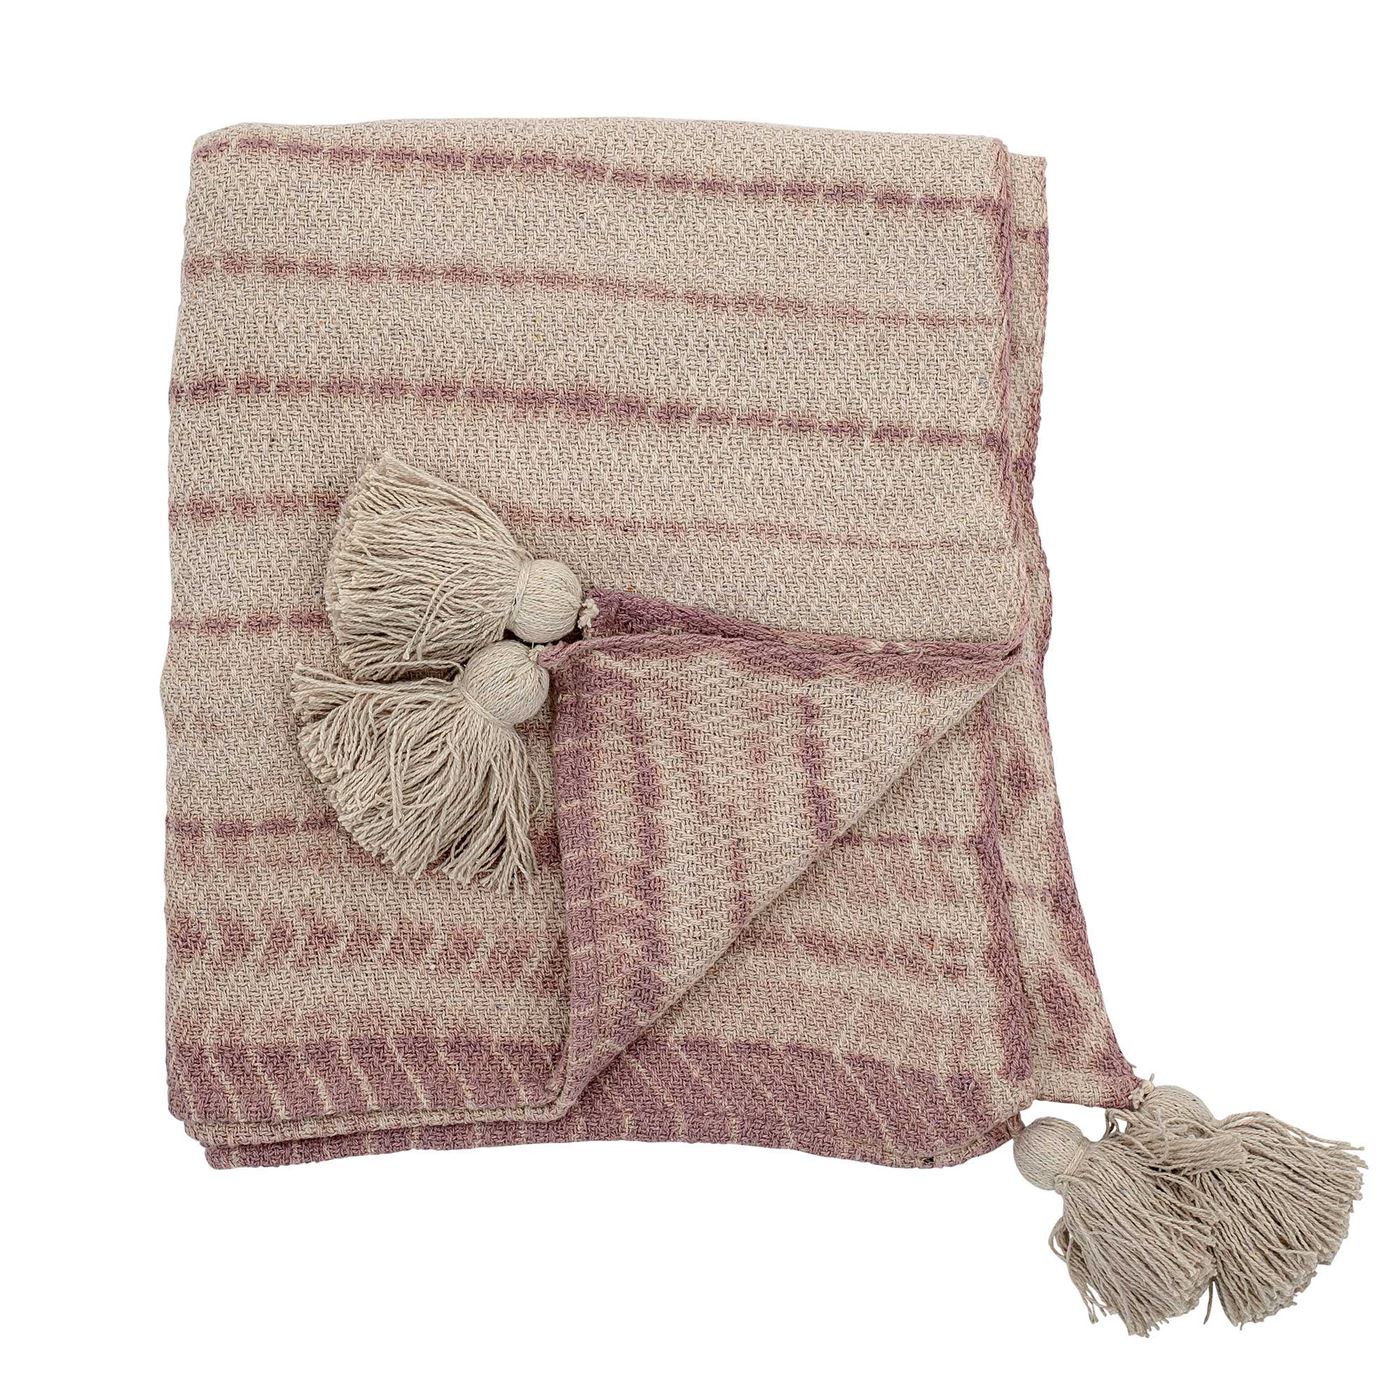 Photo of Blush throw blanket in pink